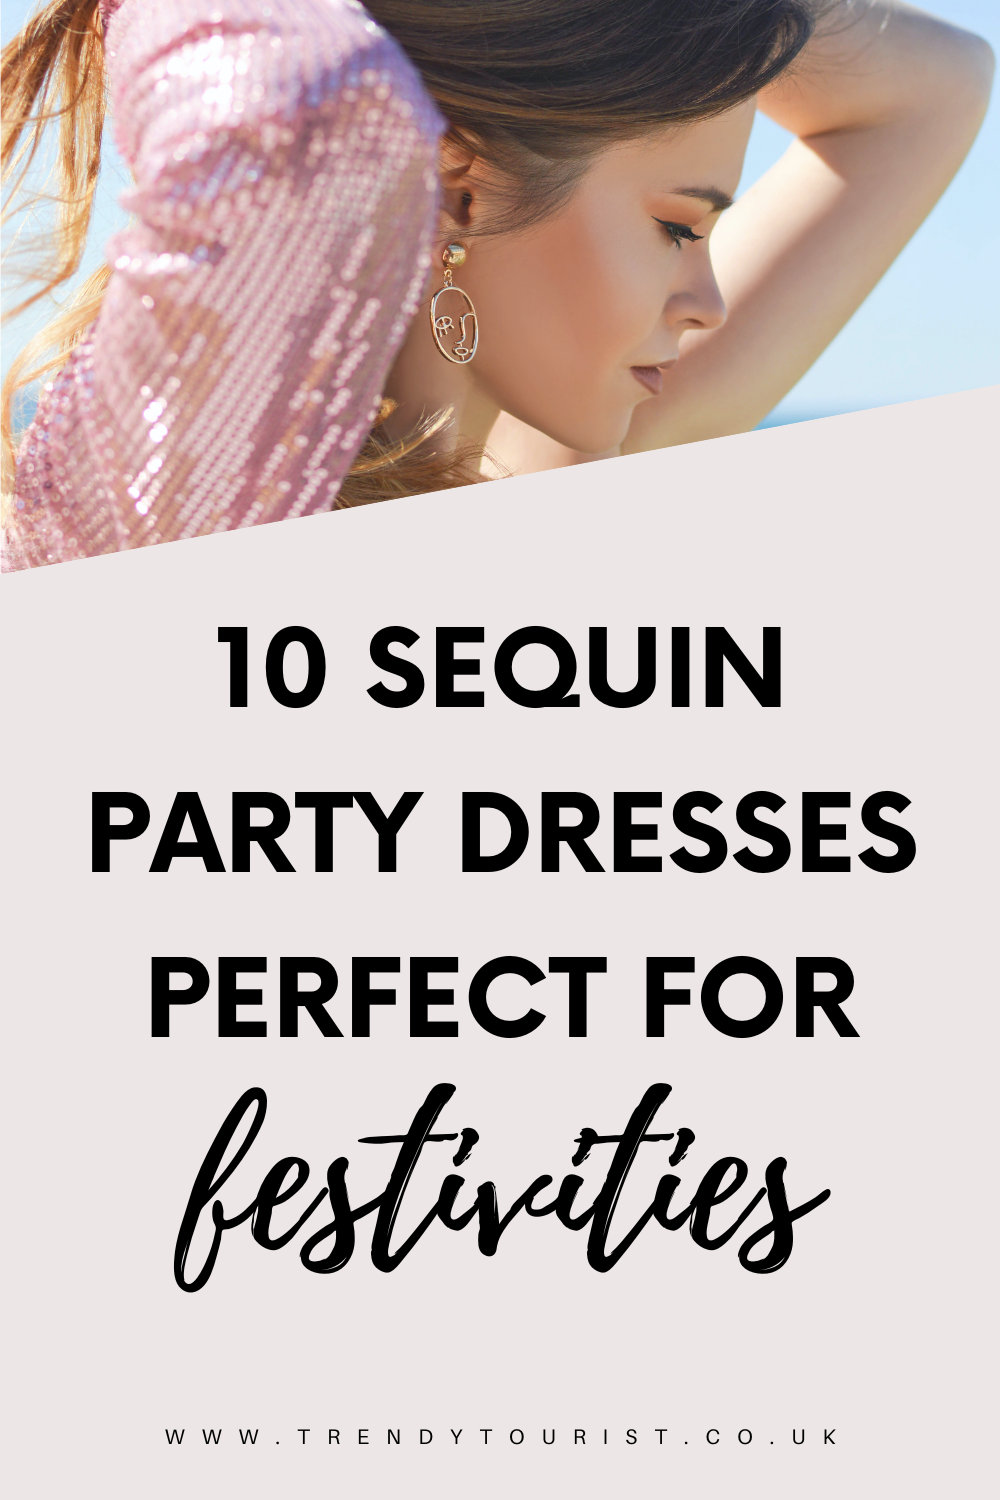 10 Sequin Party Dresses Perfect for Festivities